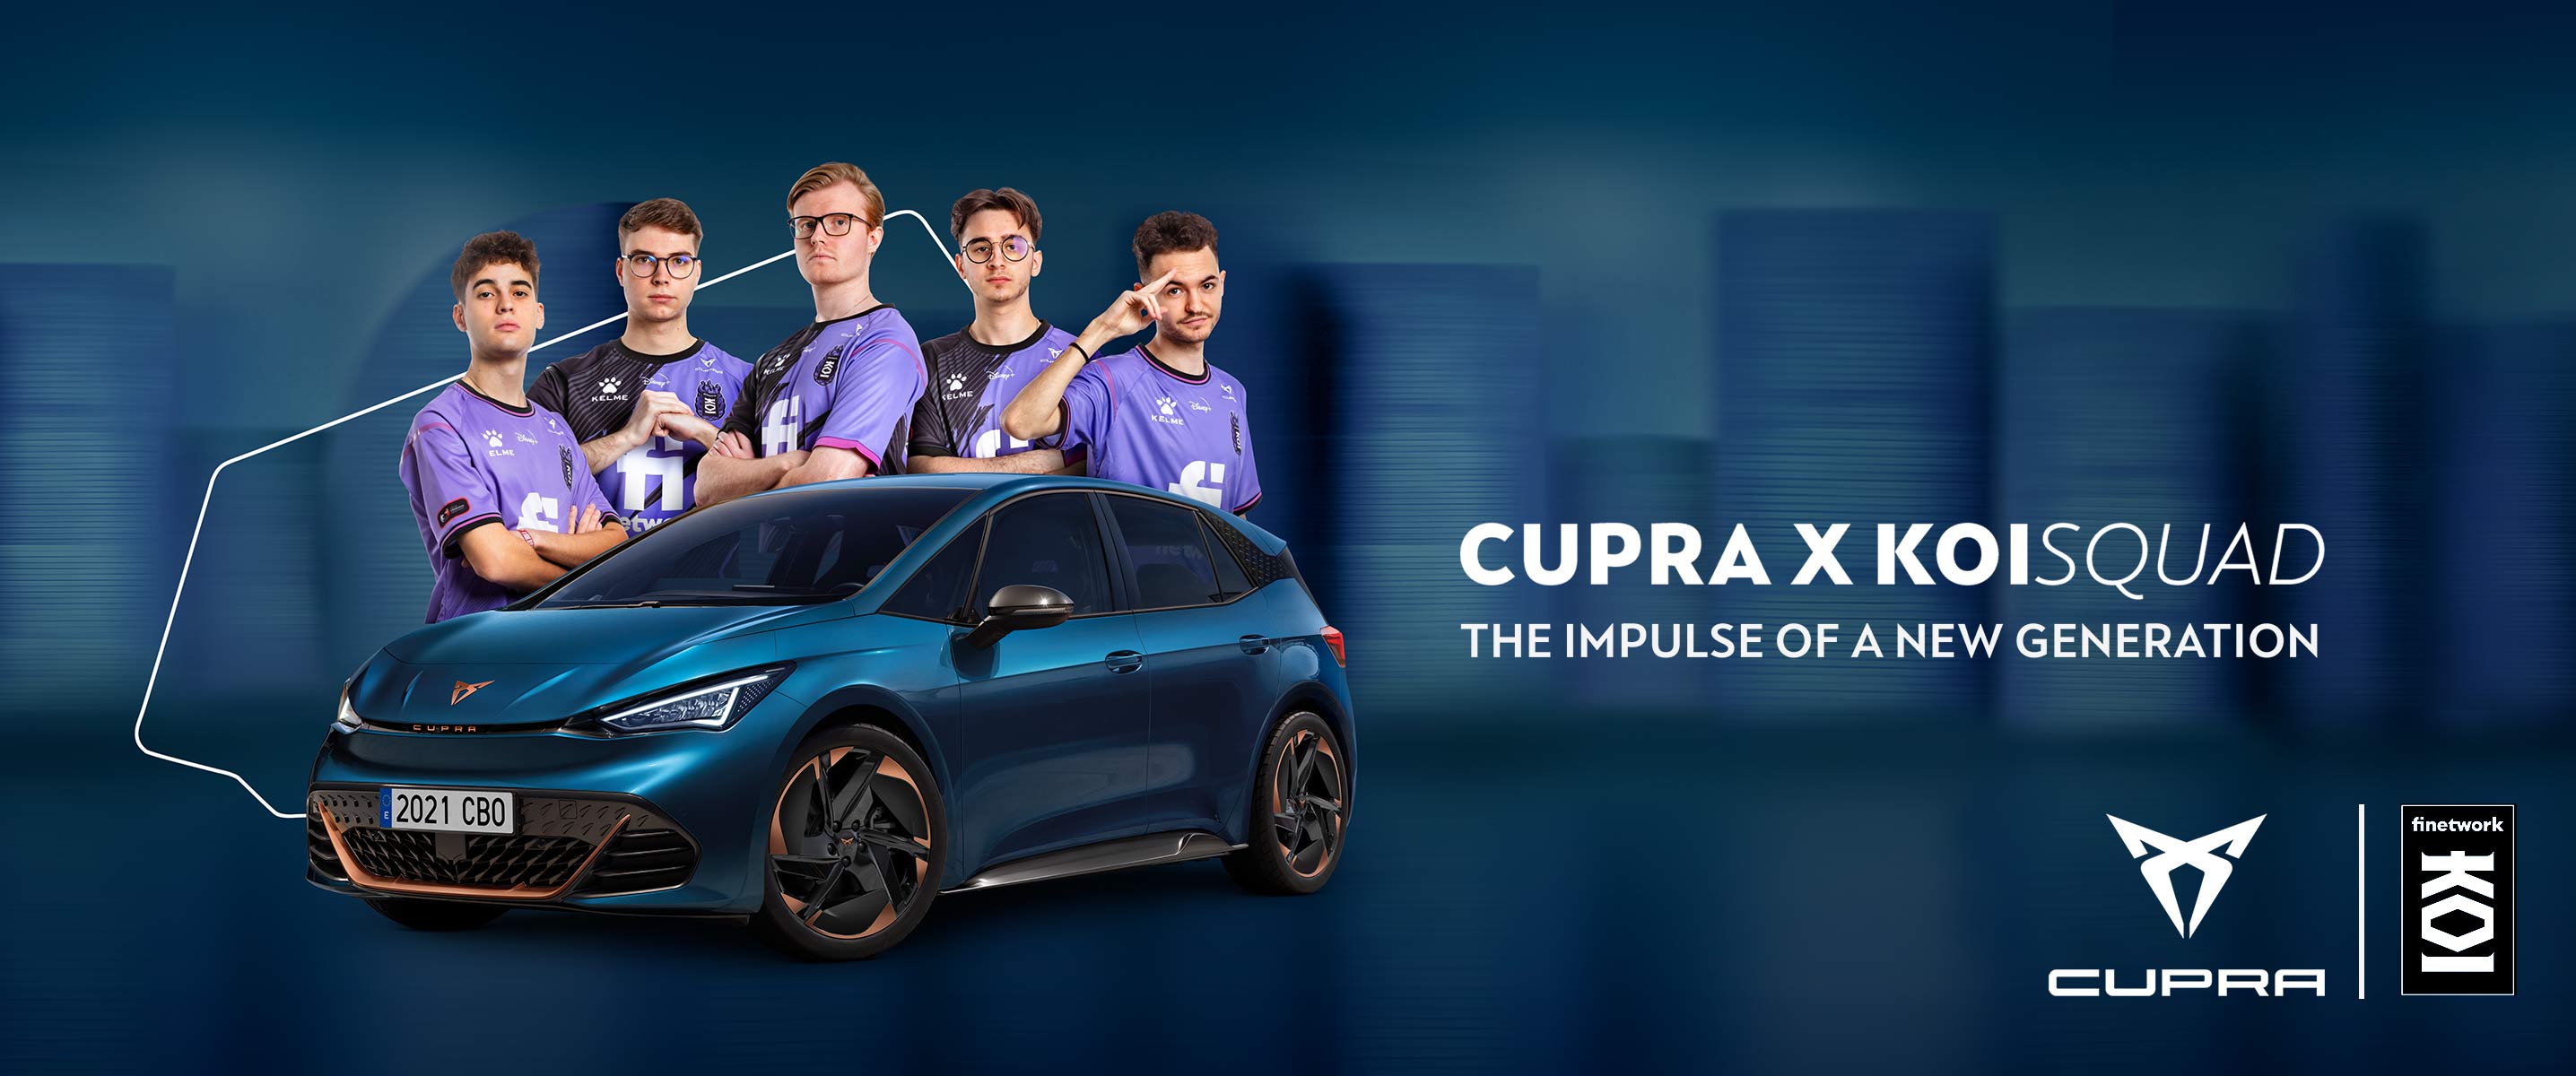 CUPRA becoming the official sponsor of the esports club created by star streamer and presenter Ibai Llanos and FC Barcelona star Gerard Piqué